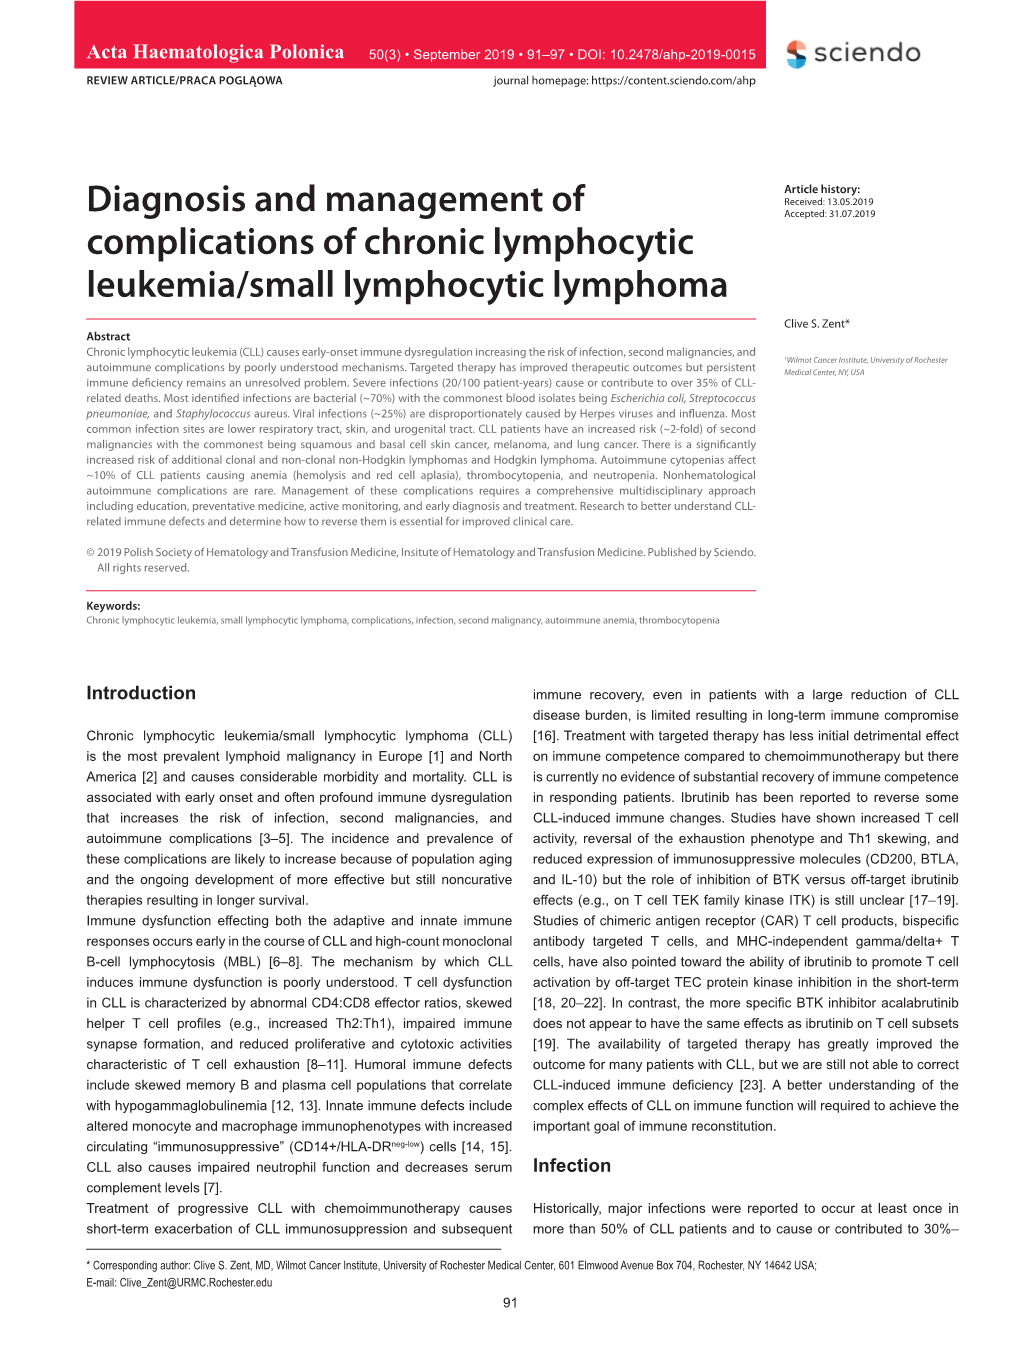 Diagnosis and Management of Complications of Chronic